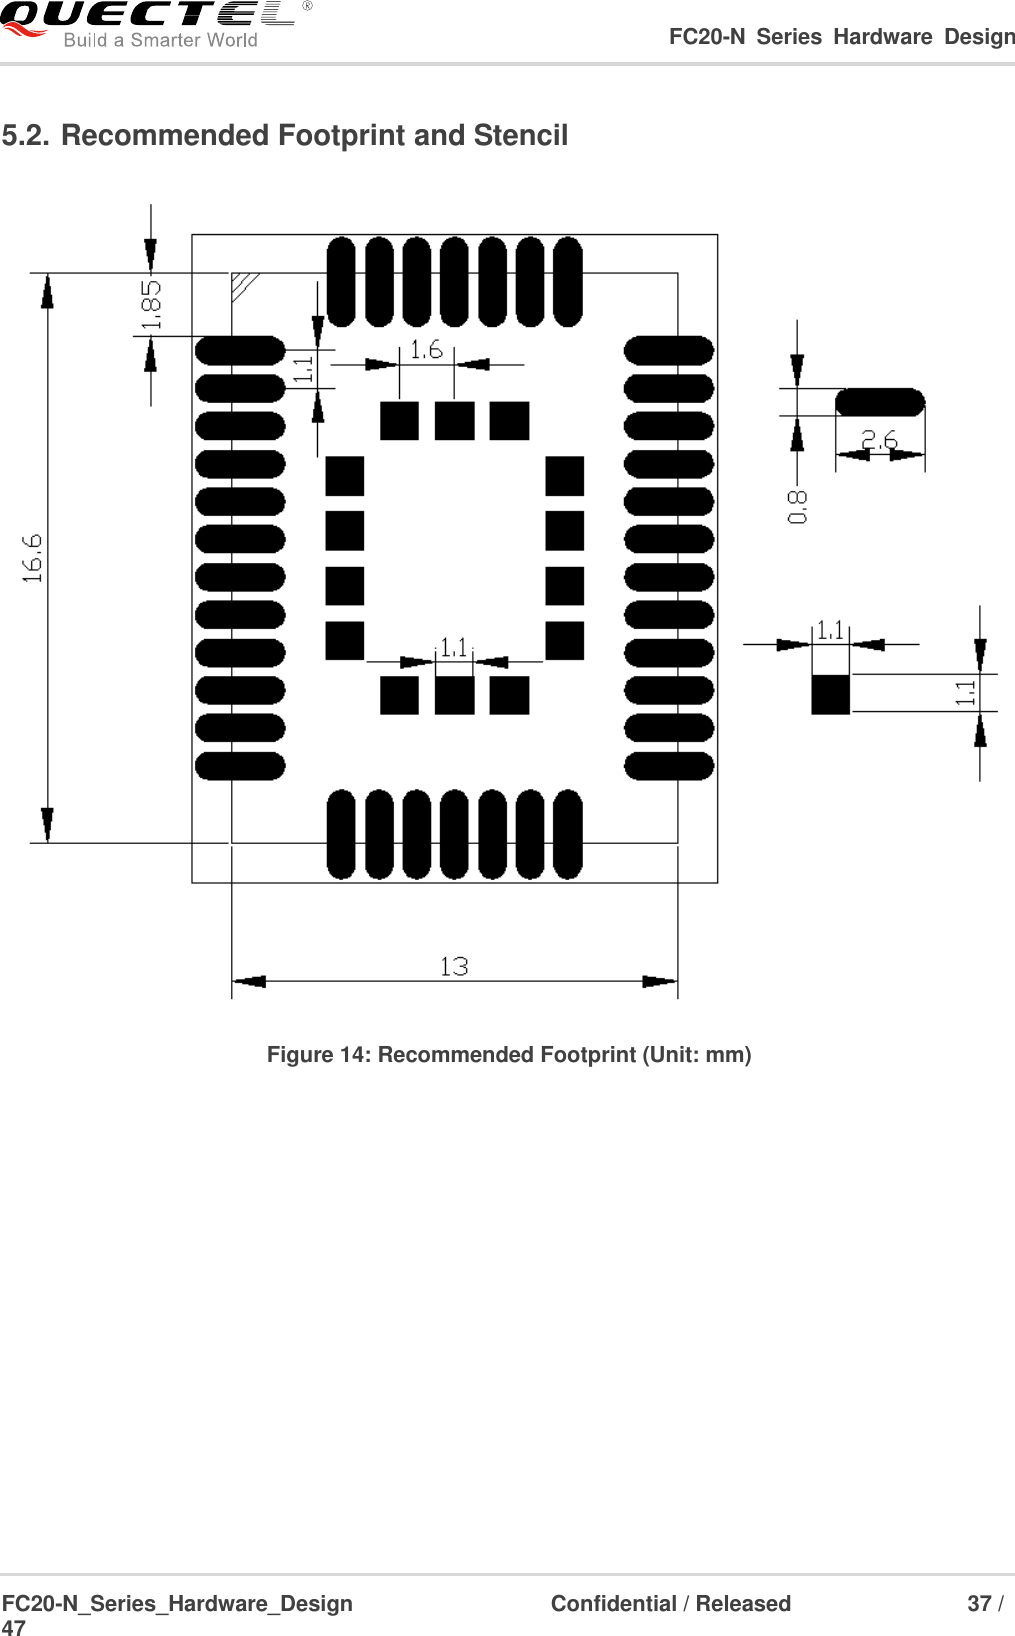                                                                                                                                     FC20-N  Series  Hardware  Design  FC20-N_Series_Hardware_Design                                Confidential / Released                    37 / 47    5.2. Recommended Footprint and Stencil  Figure 14: Recommended Footprint (Unit: mm)               